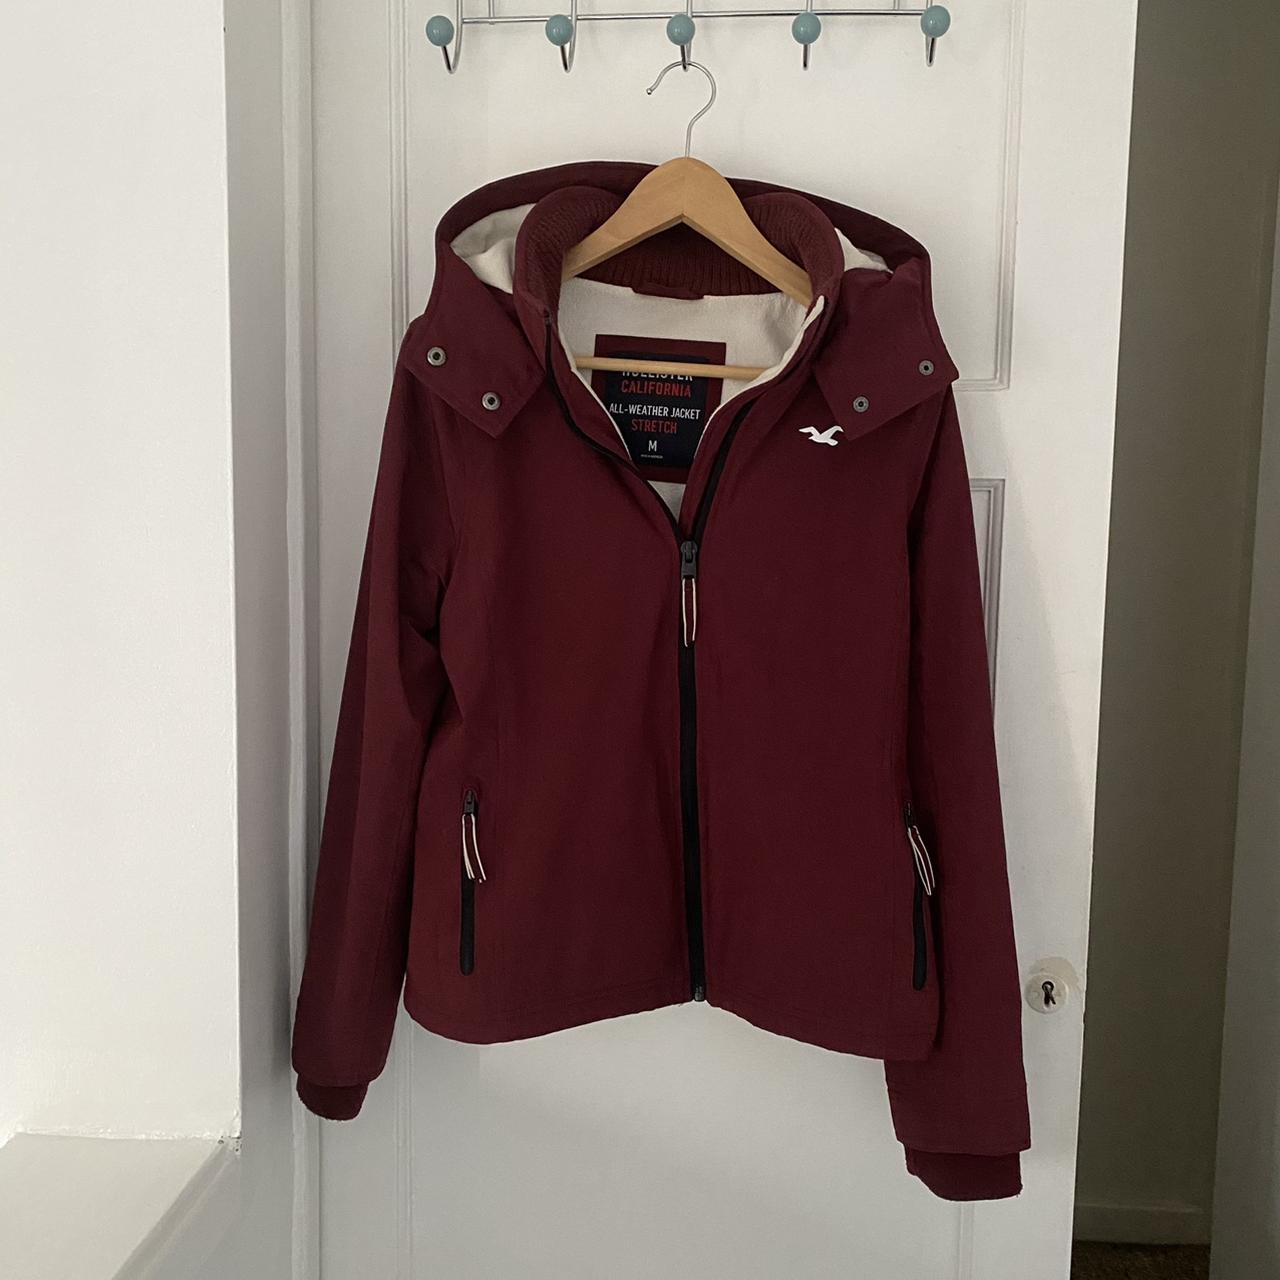 Hollister All Weather Jacket Size M, In very good